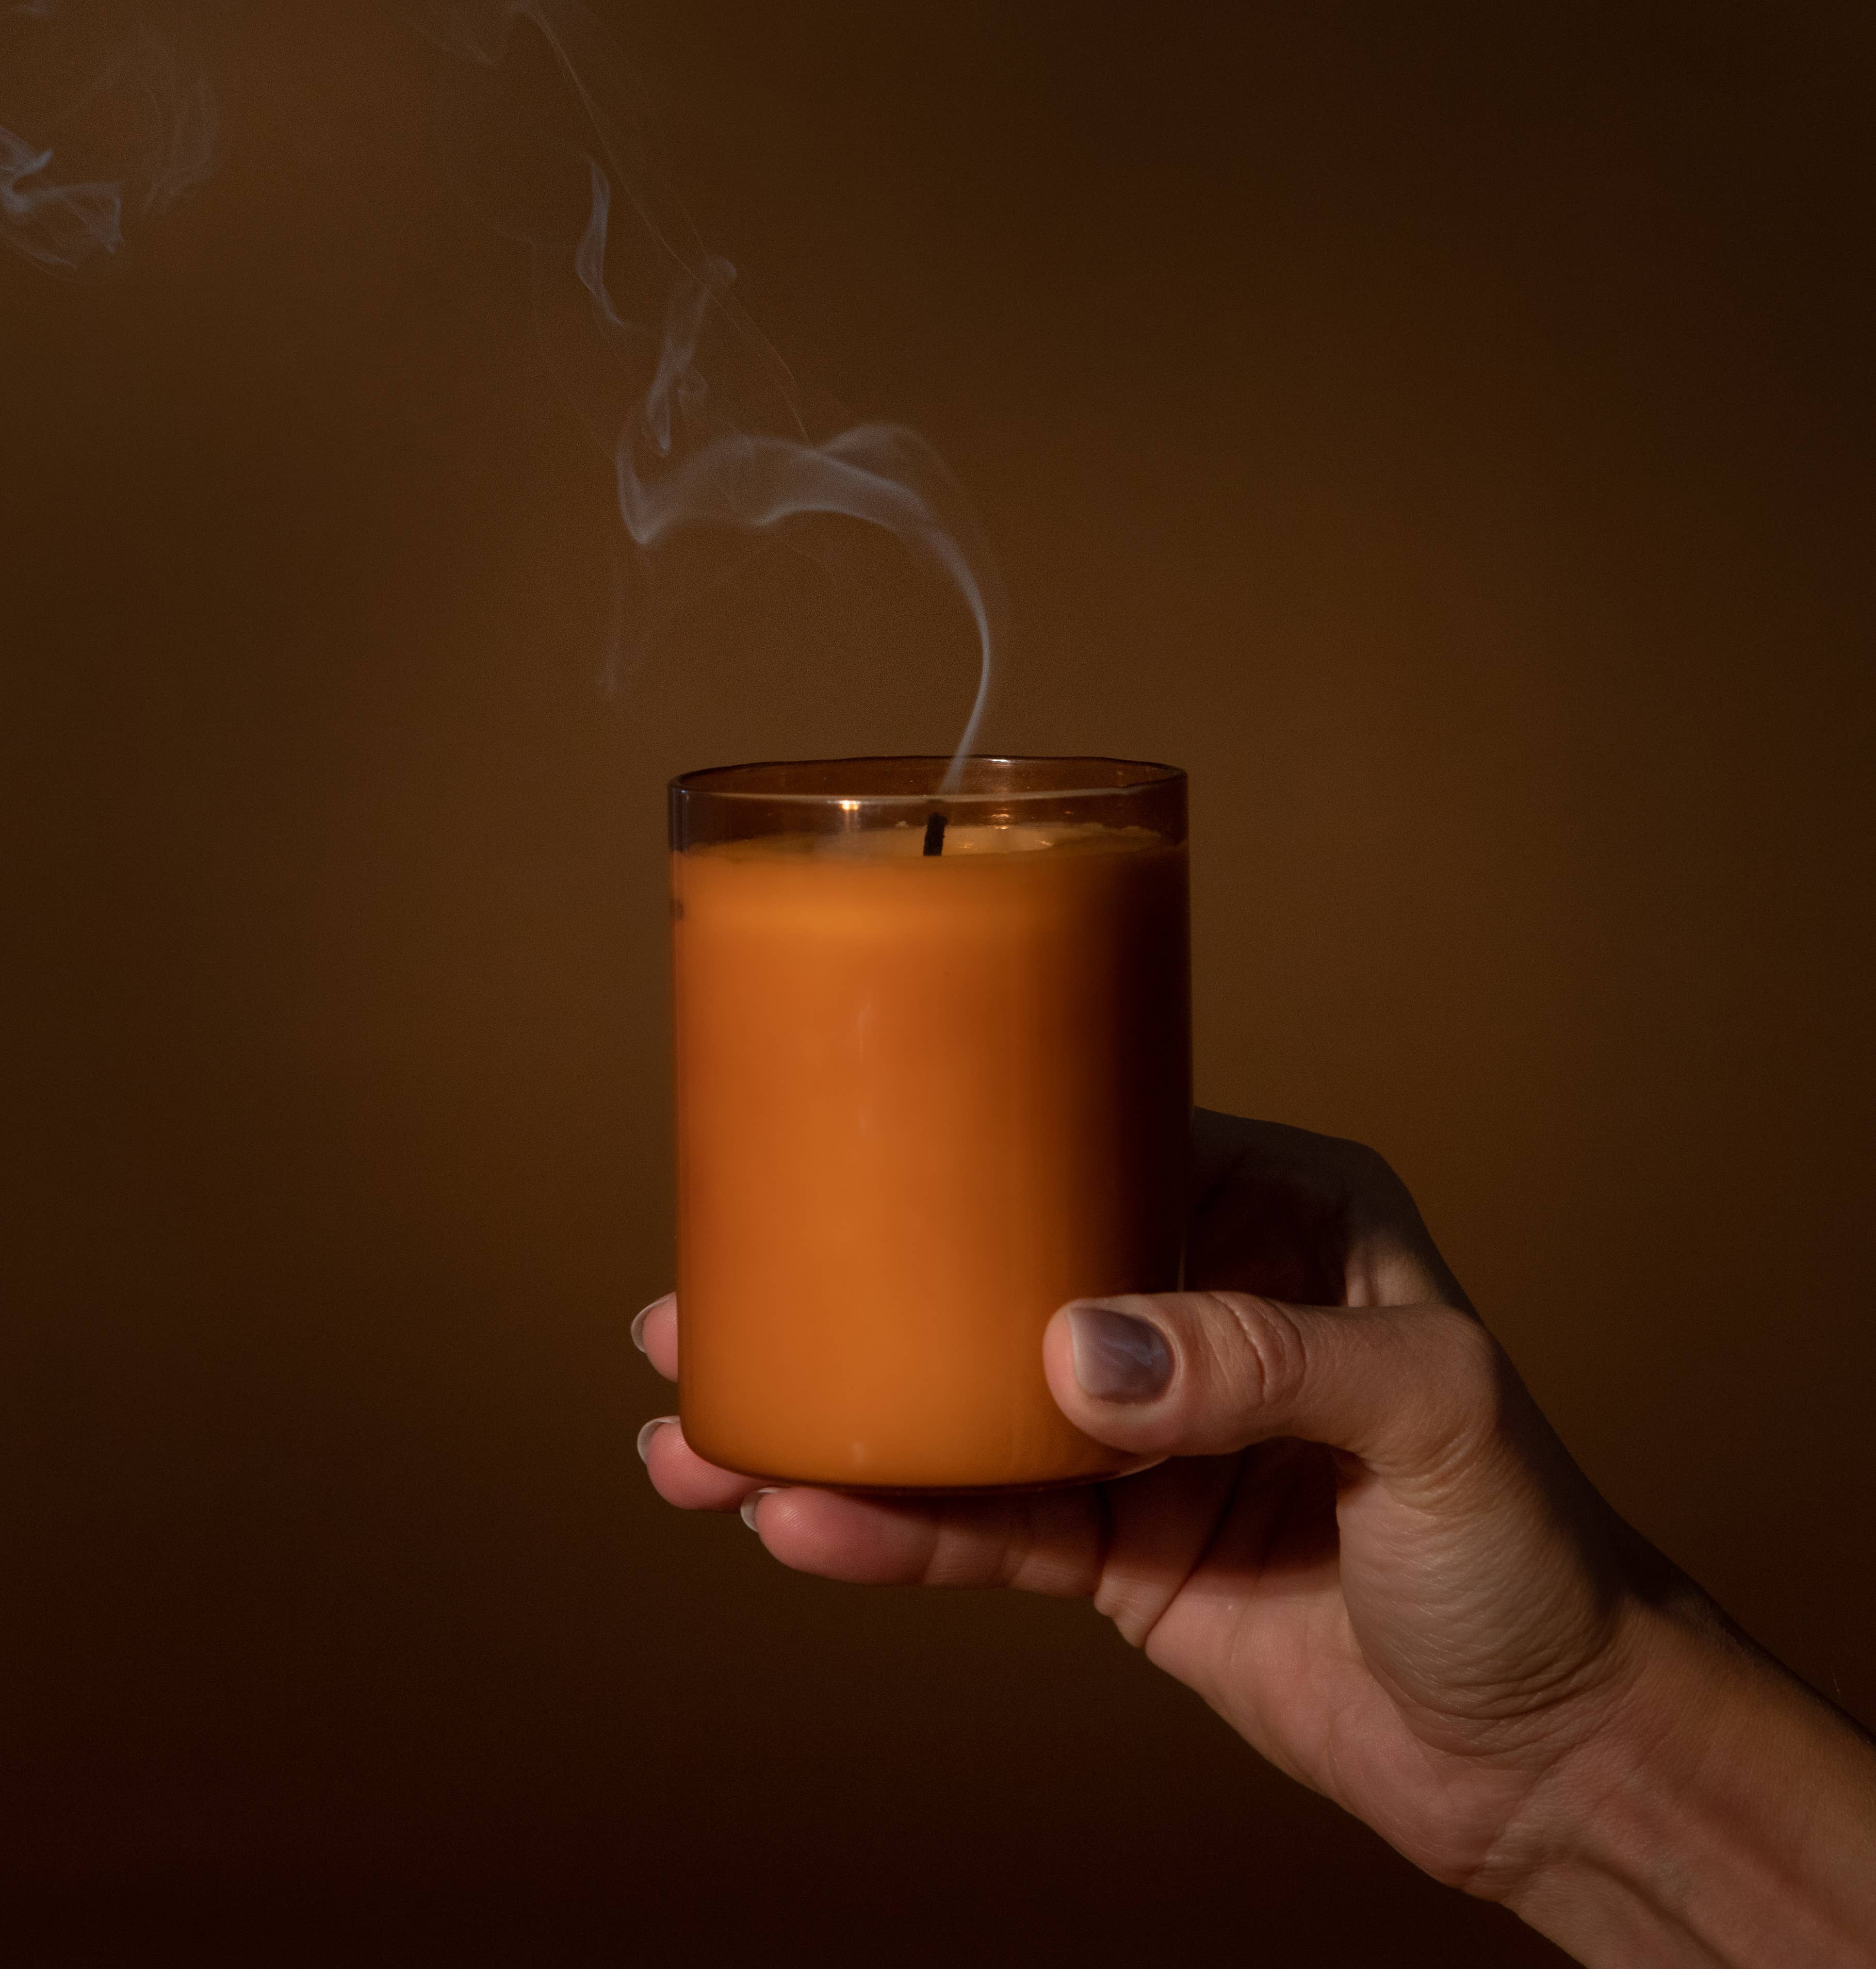 Field Kit | The Professor Glass Candle